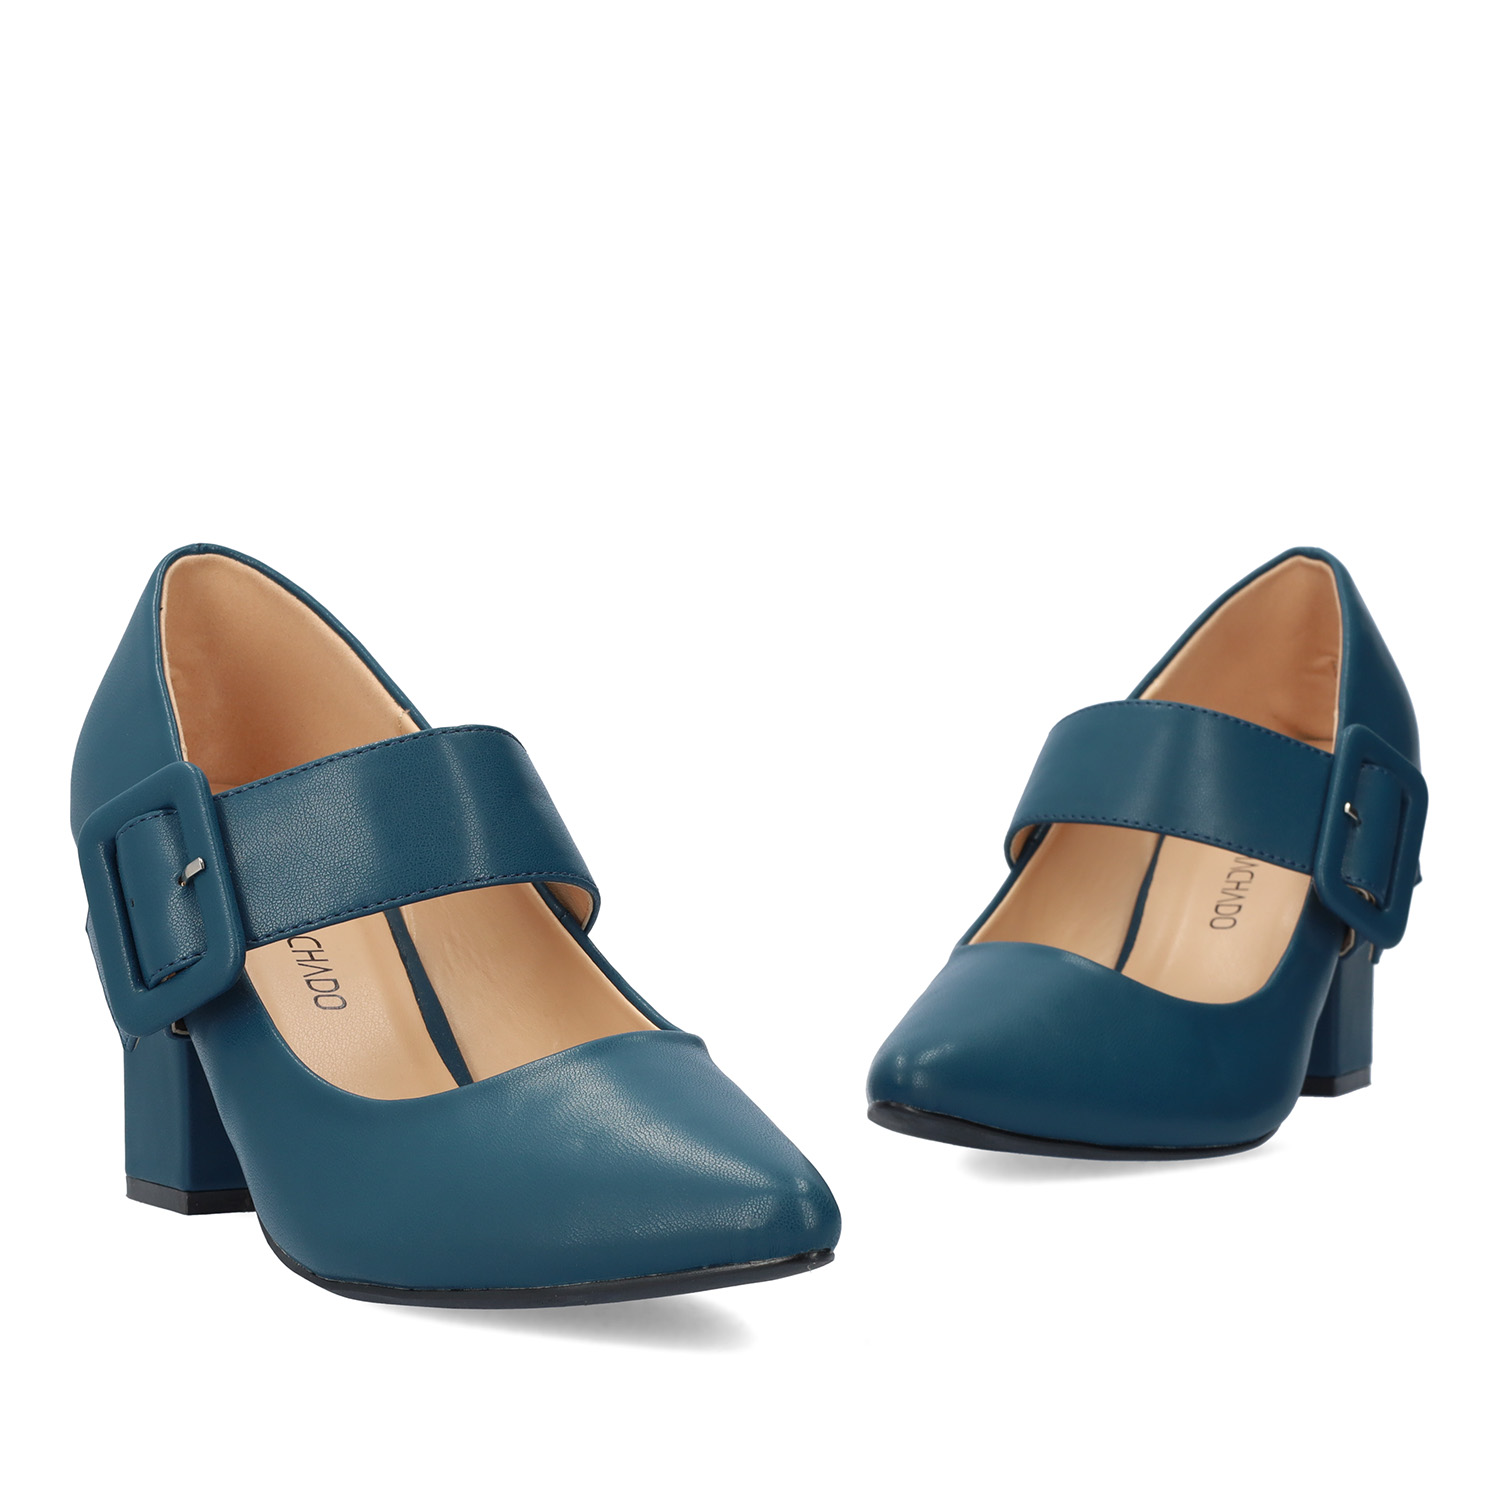 Classic pumps in blue faux leather 